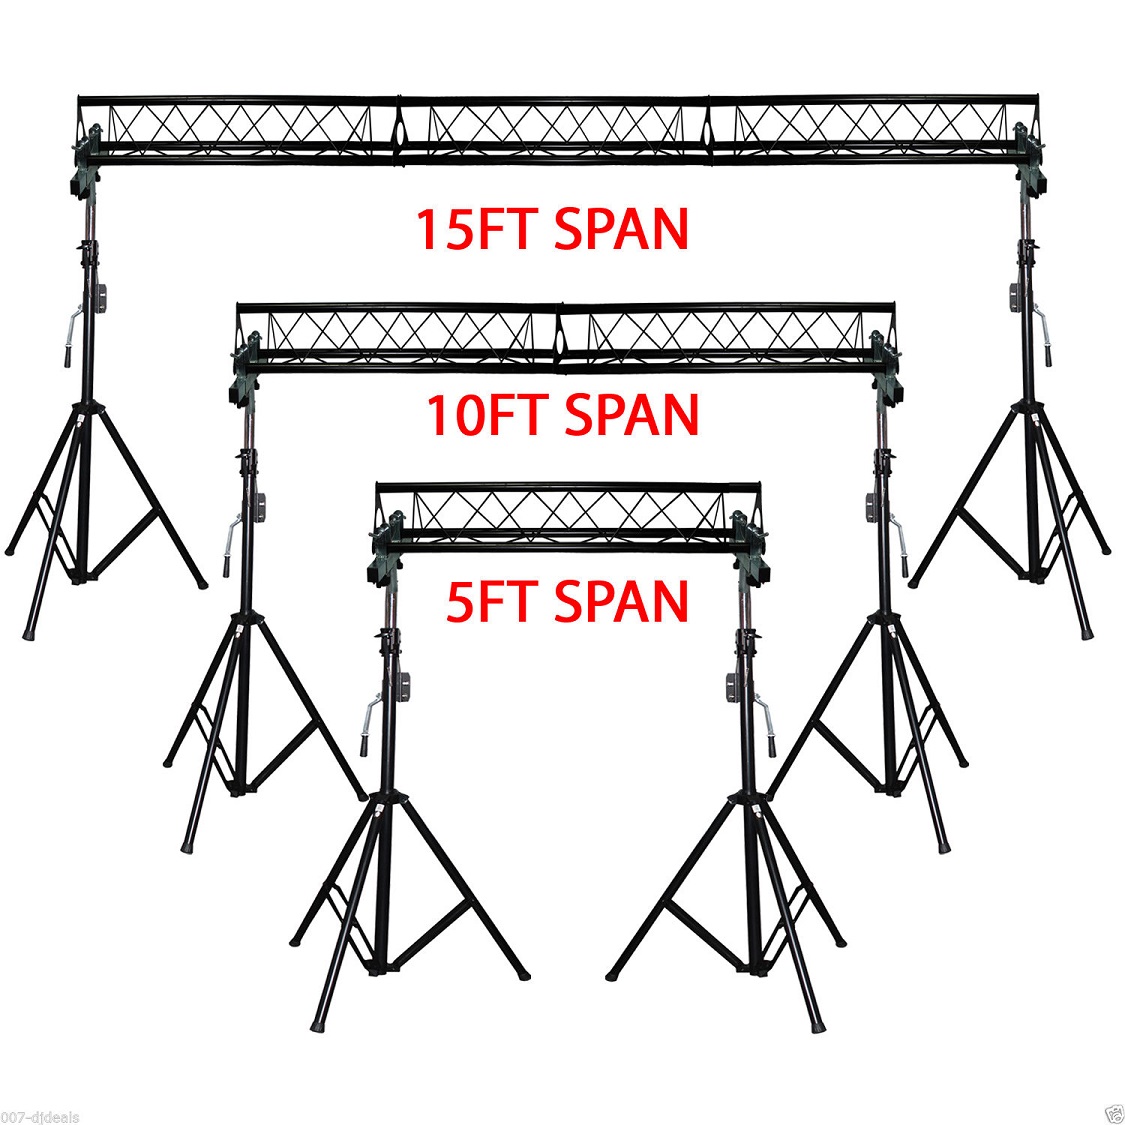 prox-t-ls35c-lighting-system-triangle-truss-with-crank-up-system-5ft-10ft-15ft-wide.jpg